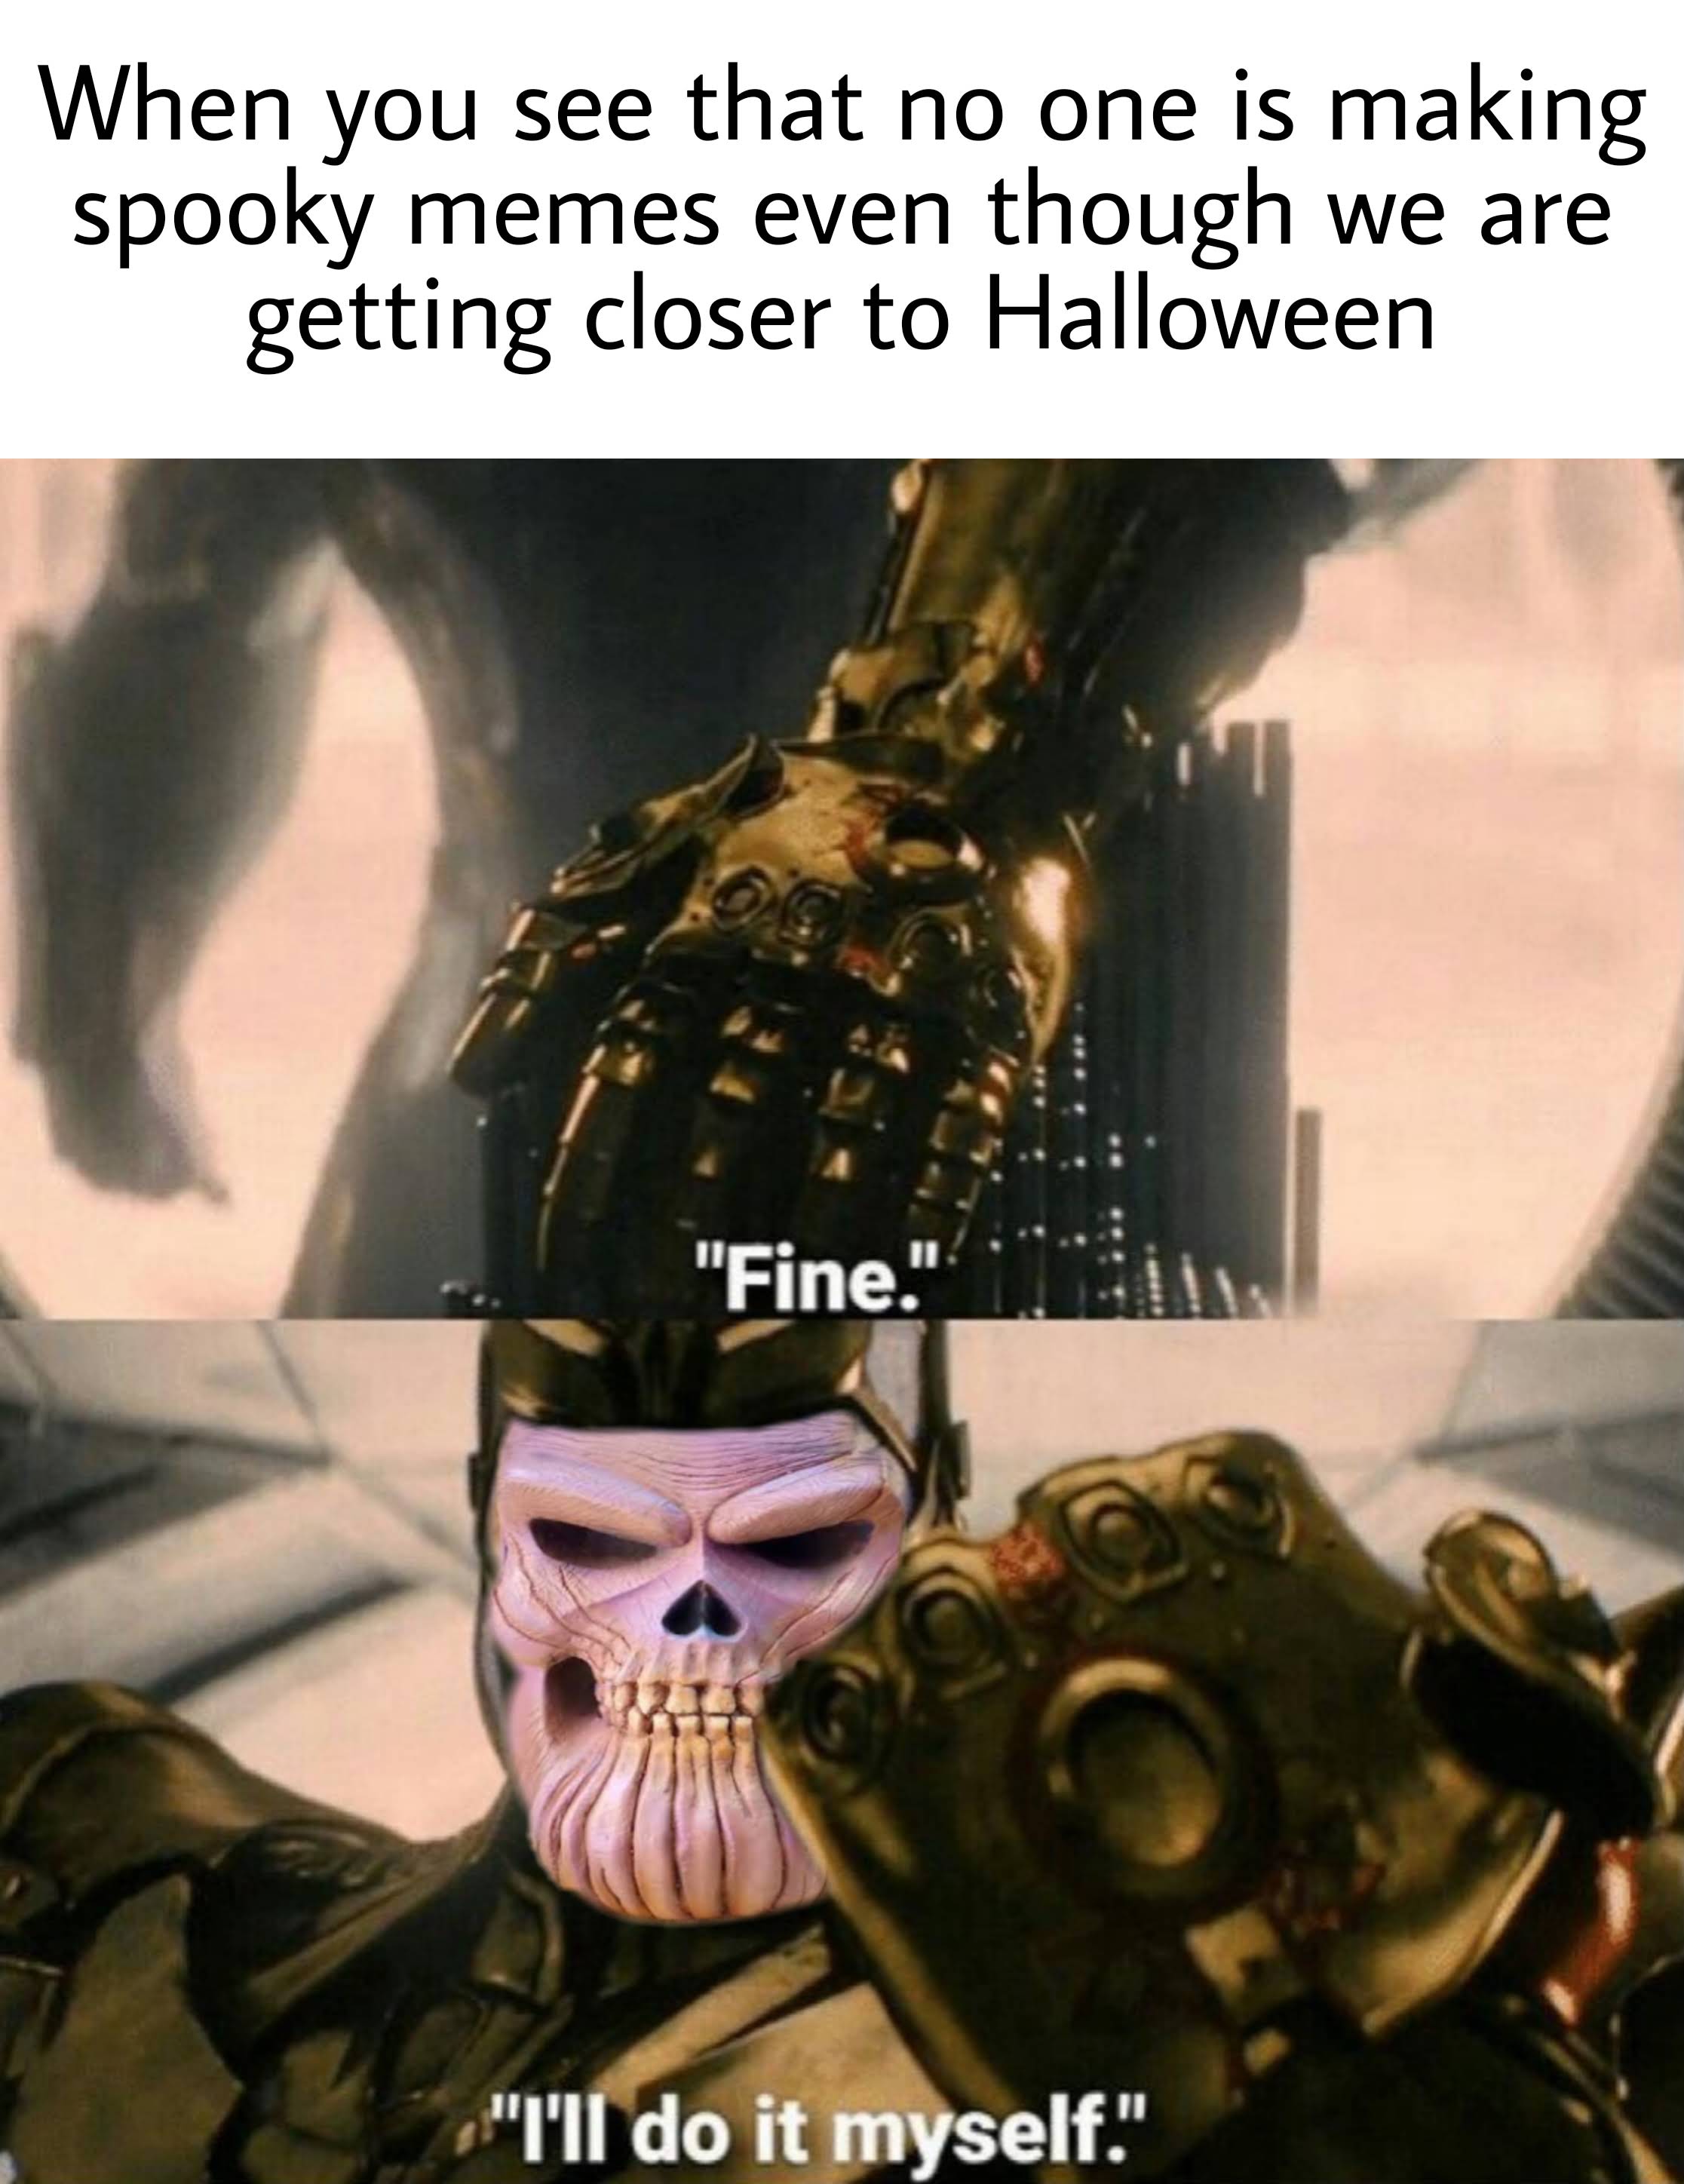 dank memes - fine i ll do it myself meme - When you see that no one is making spooky memes even though we are getting closer to Halloween "Fine." "I'll do it myself."